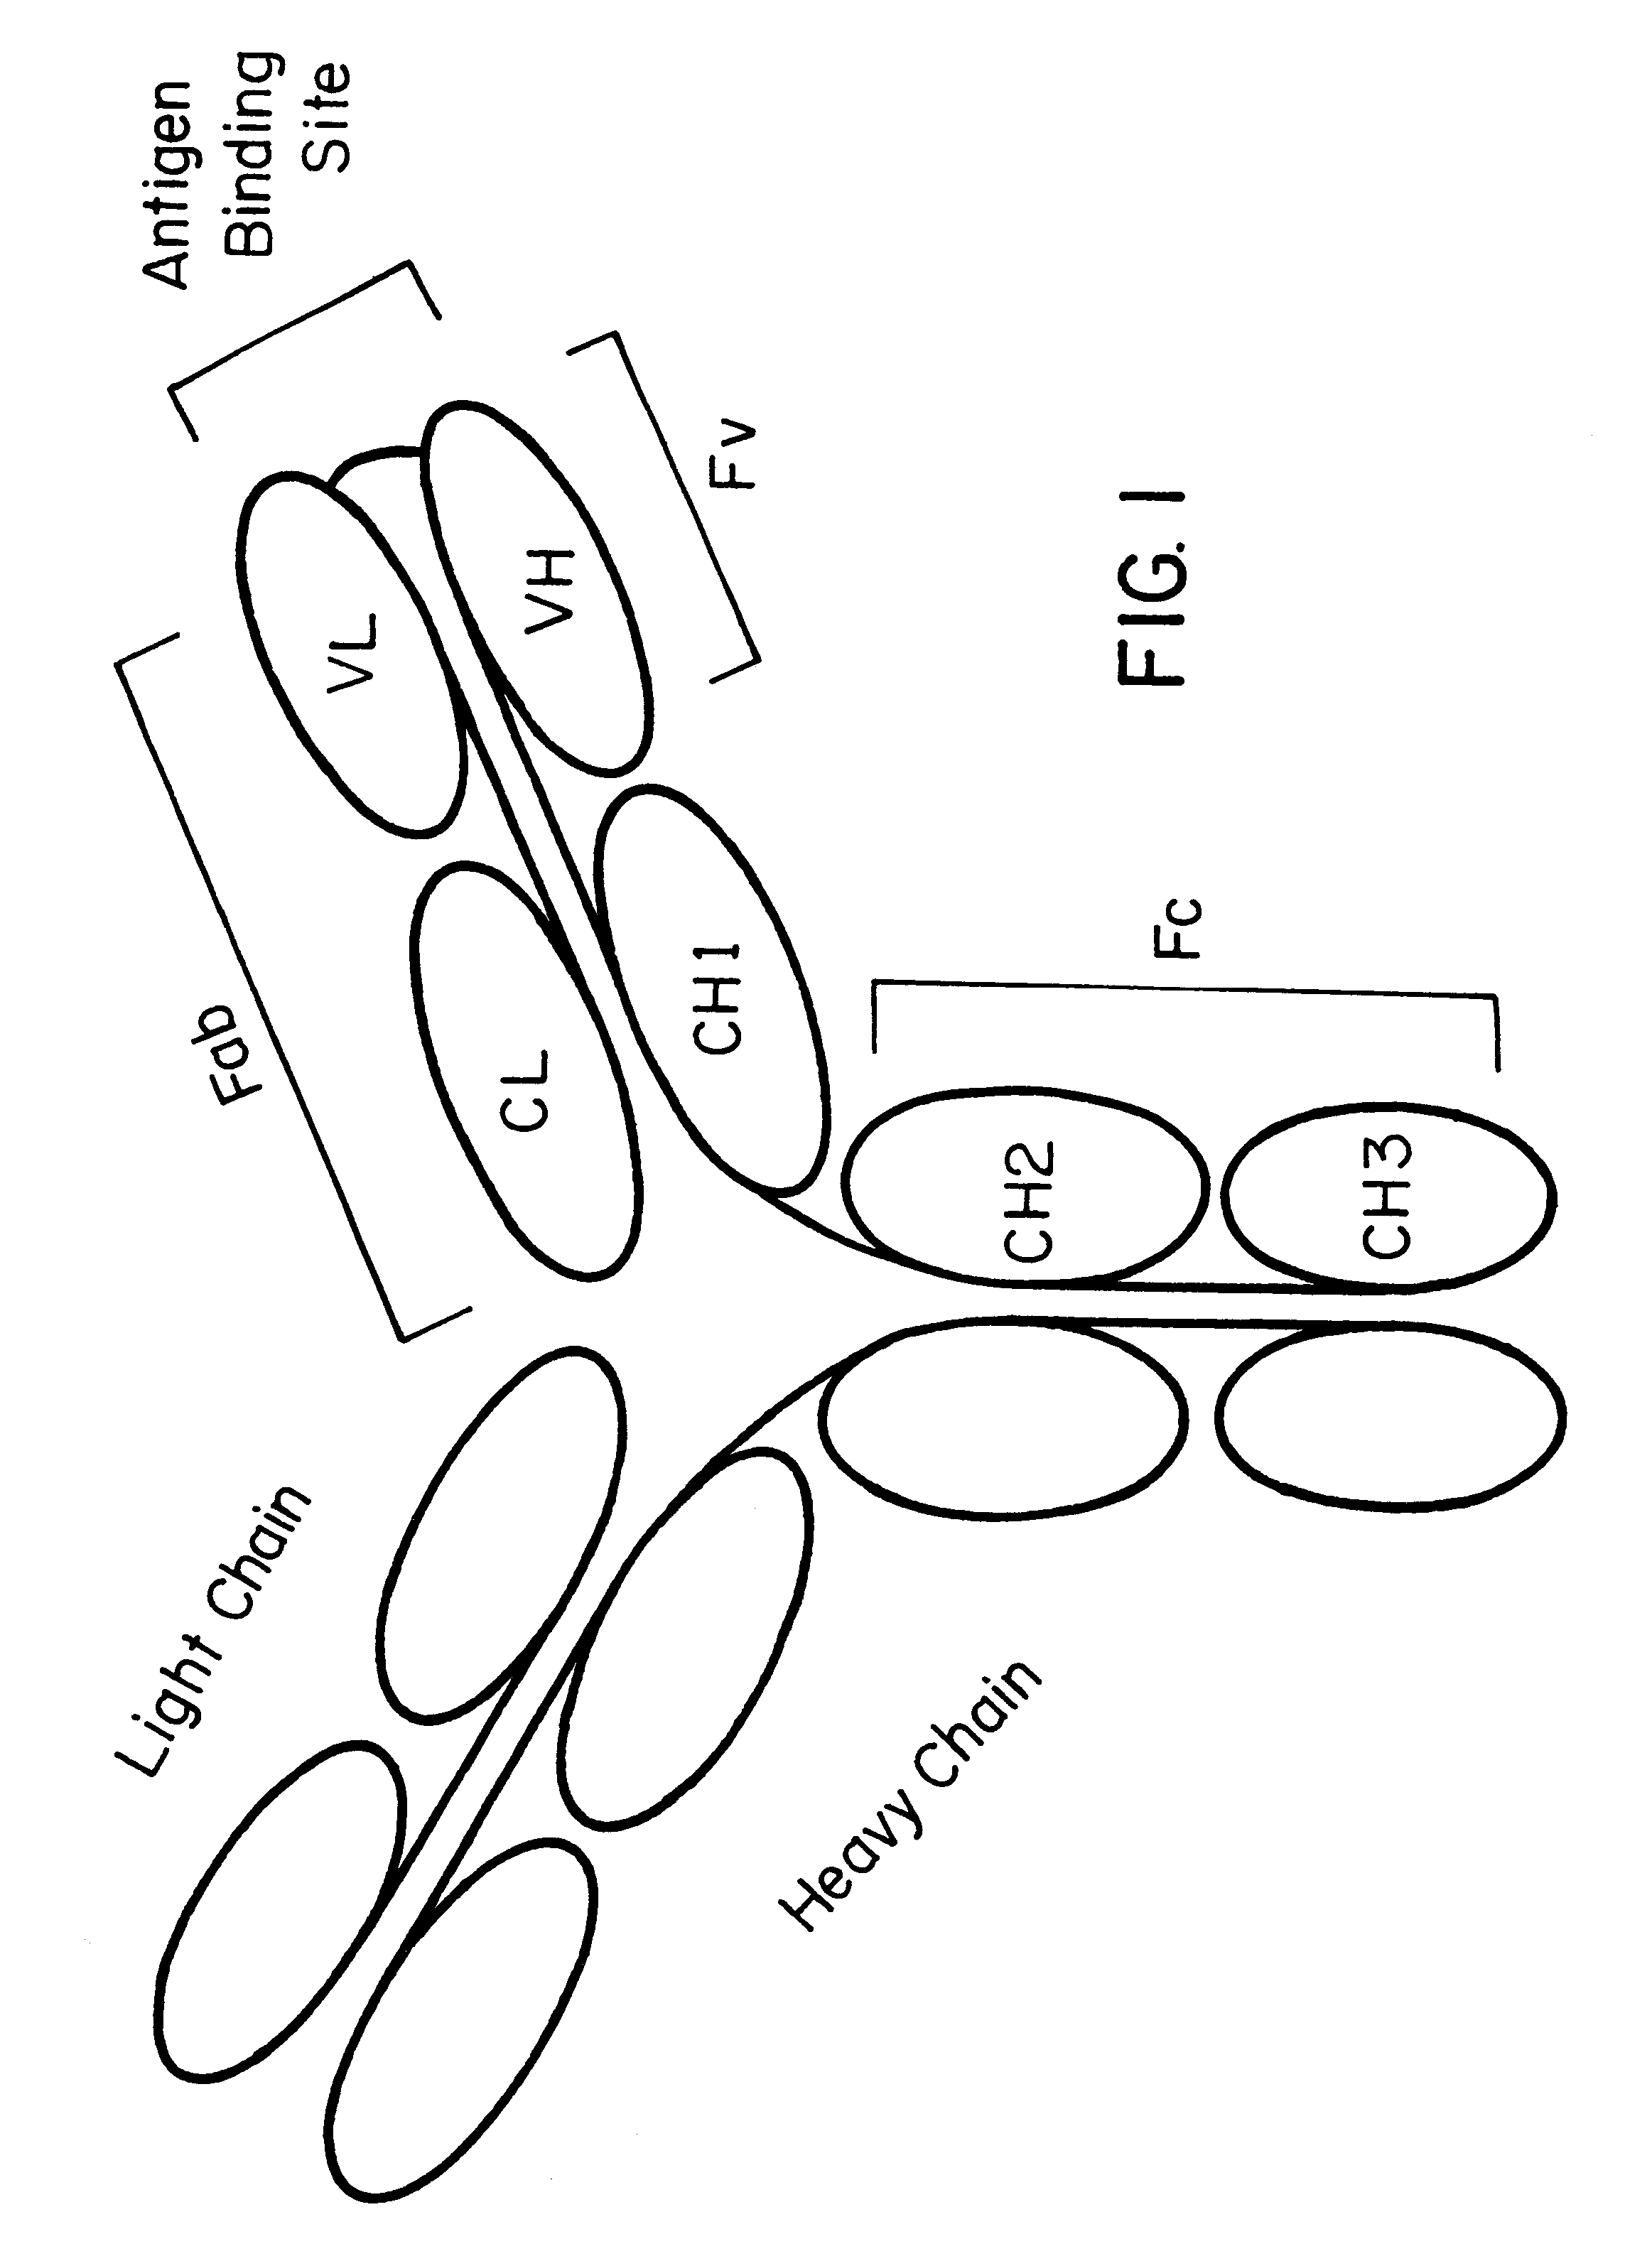 Method for altering antibody light chain interactions